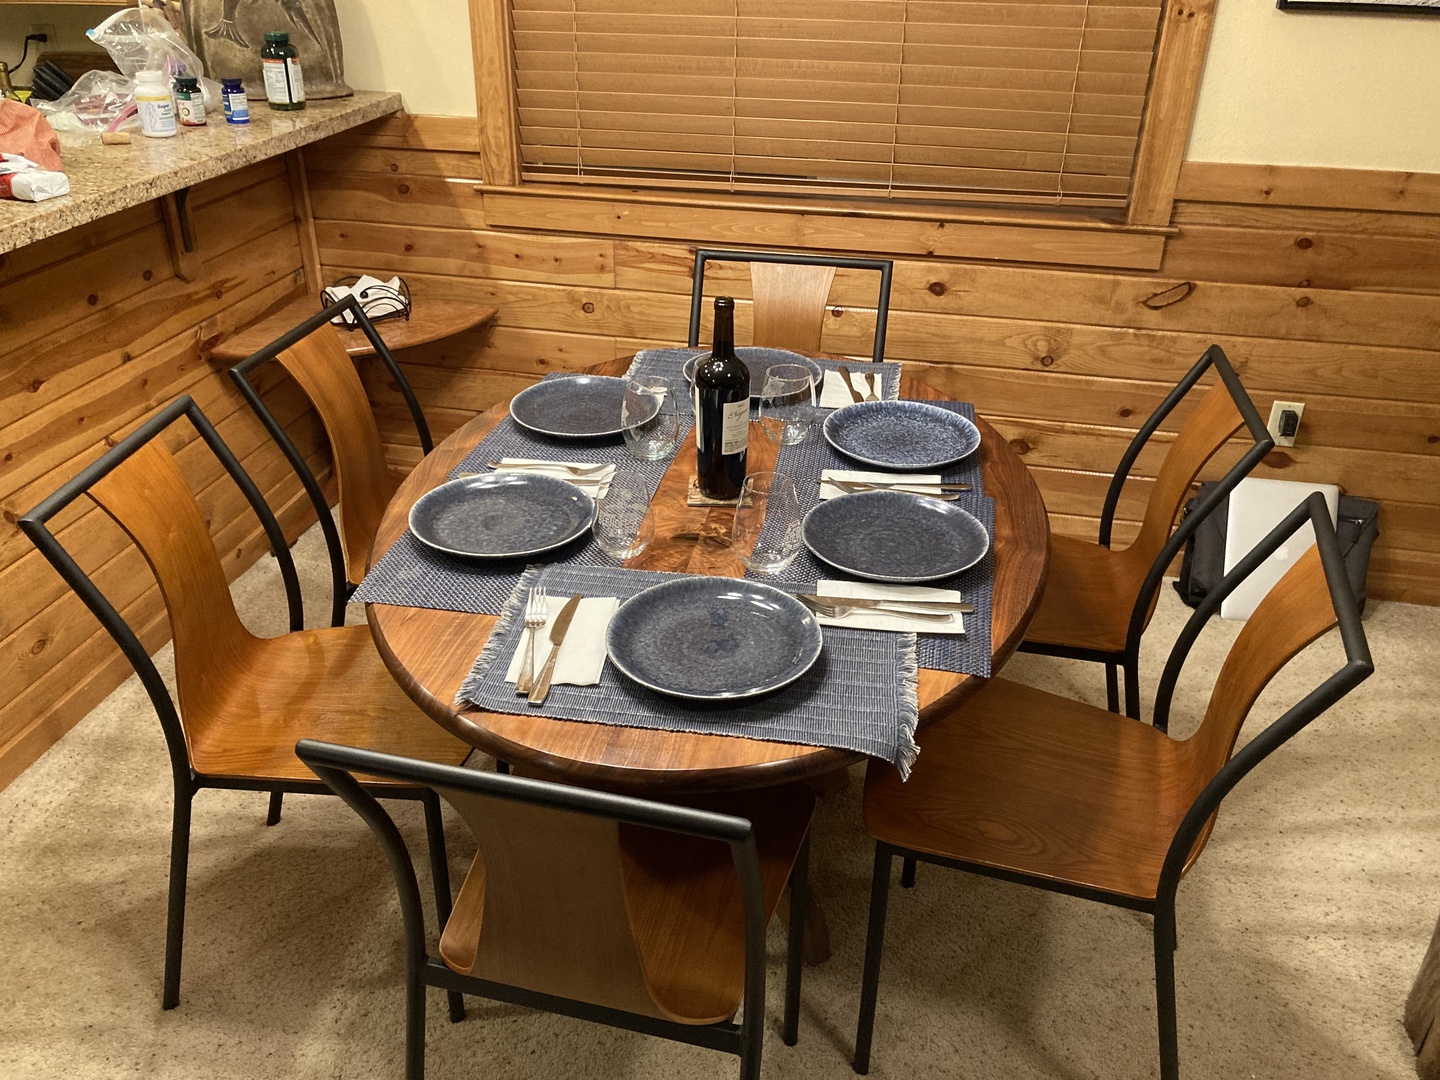 Dining table with seating for 6